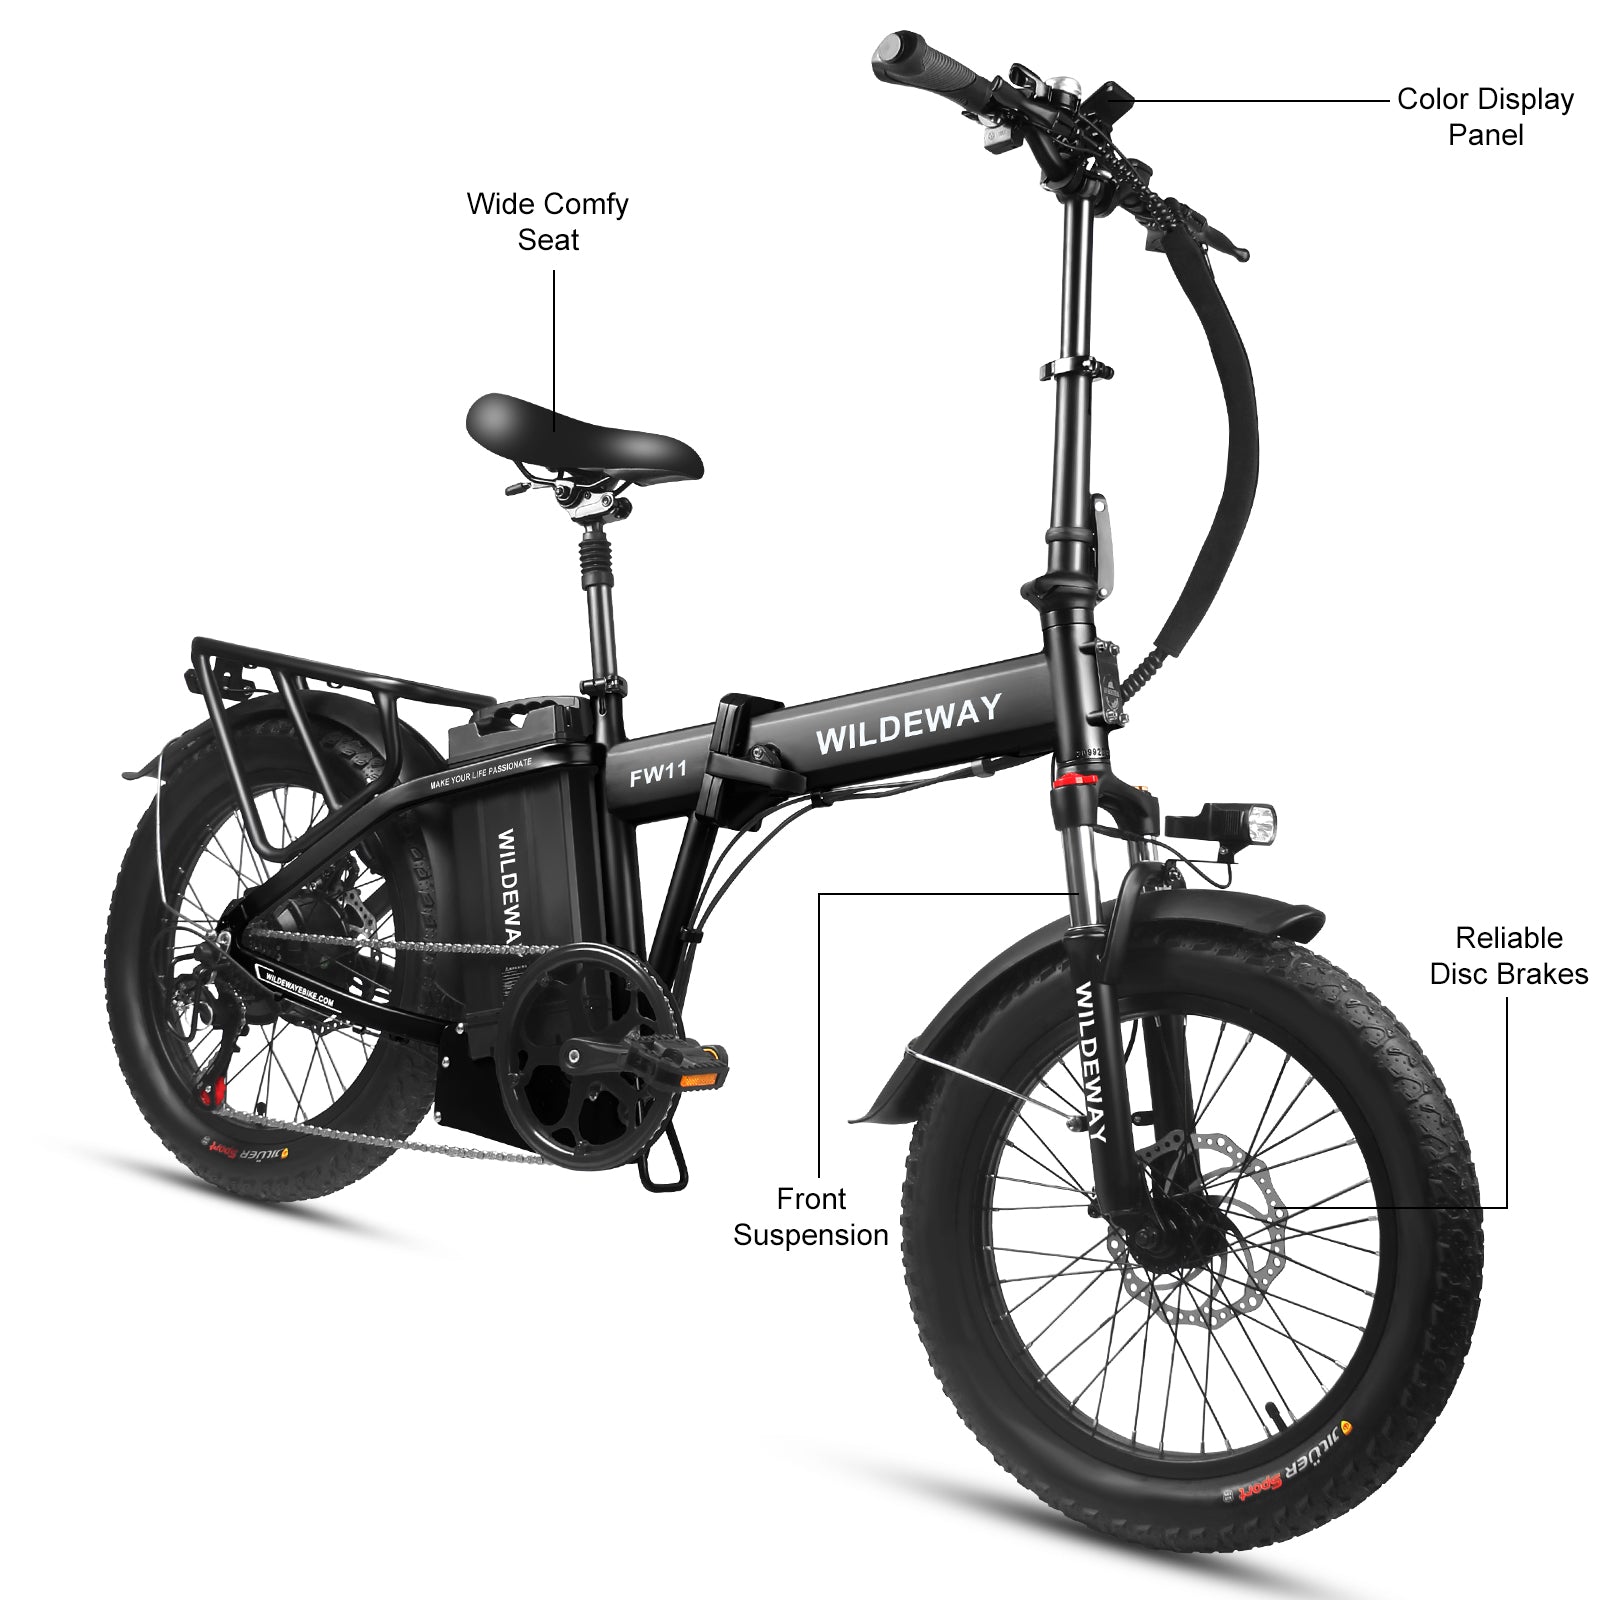 Wildeway FW11 3.0 Commute Electric Bicycle